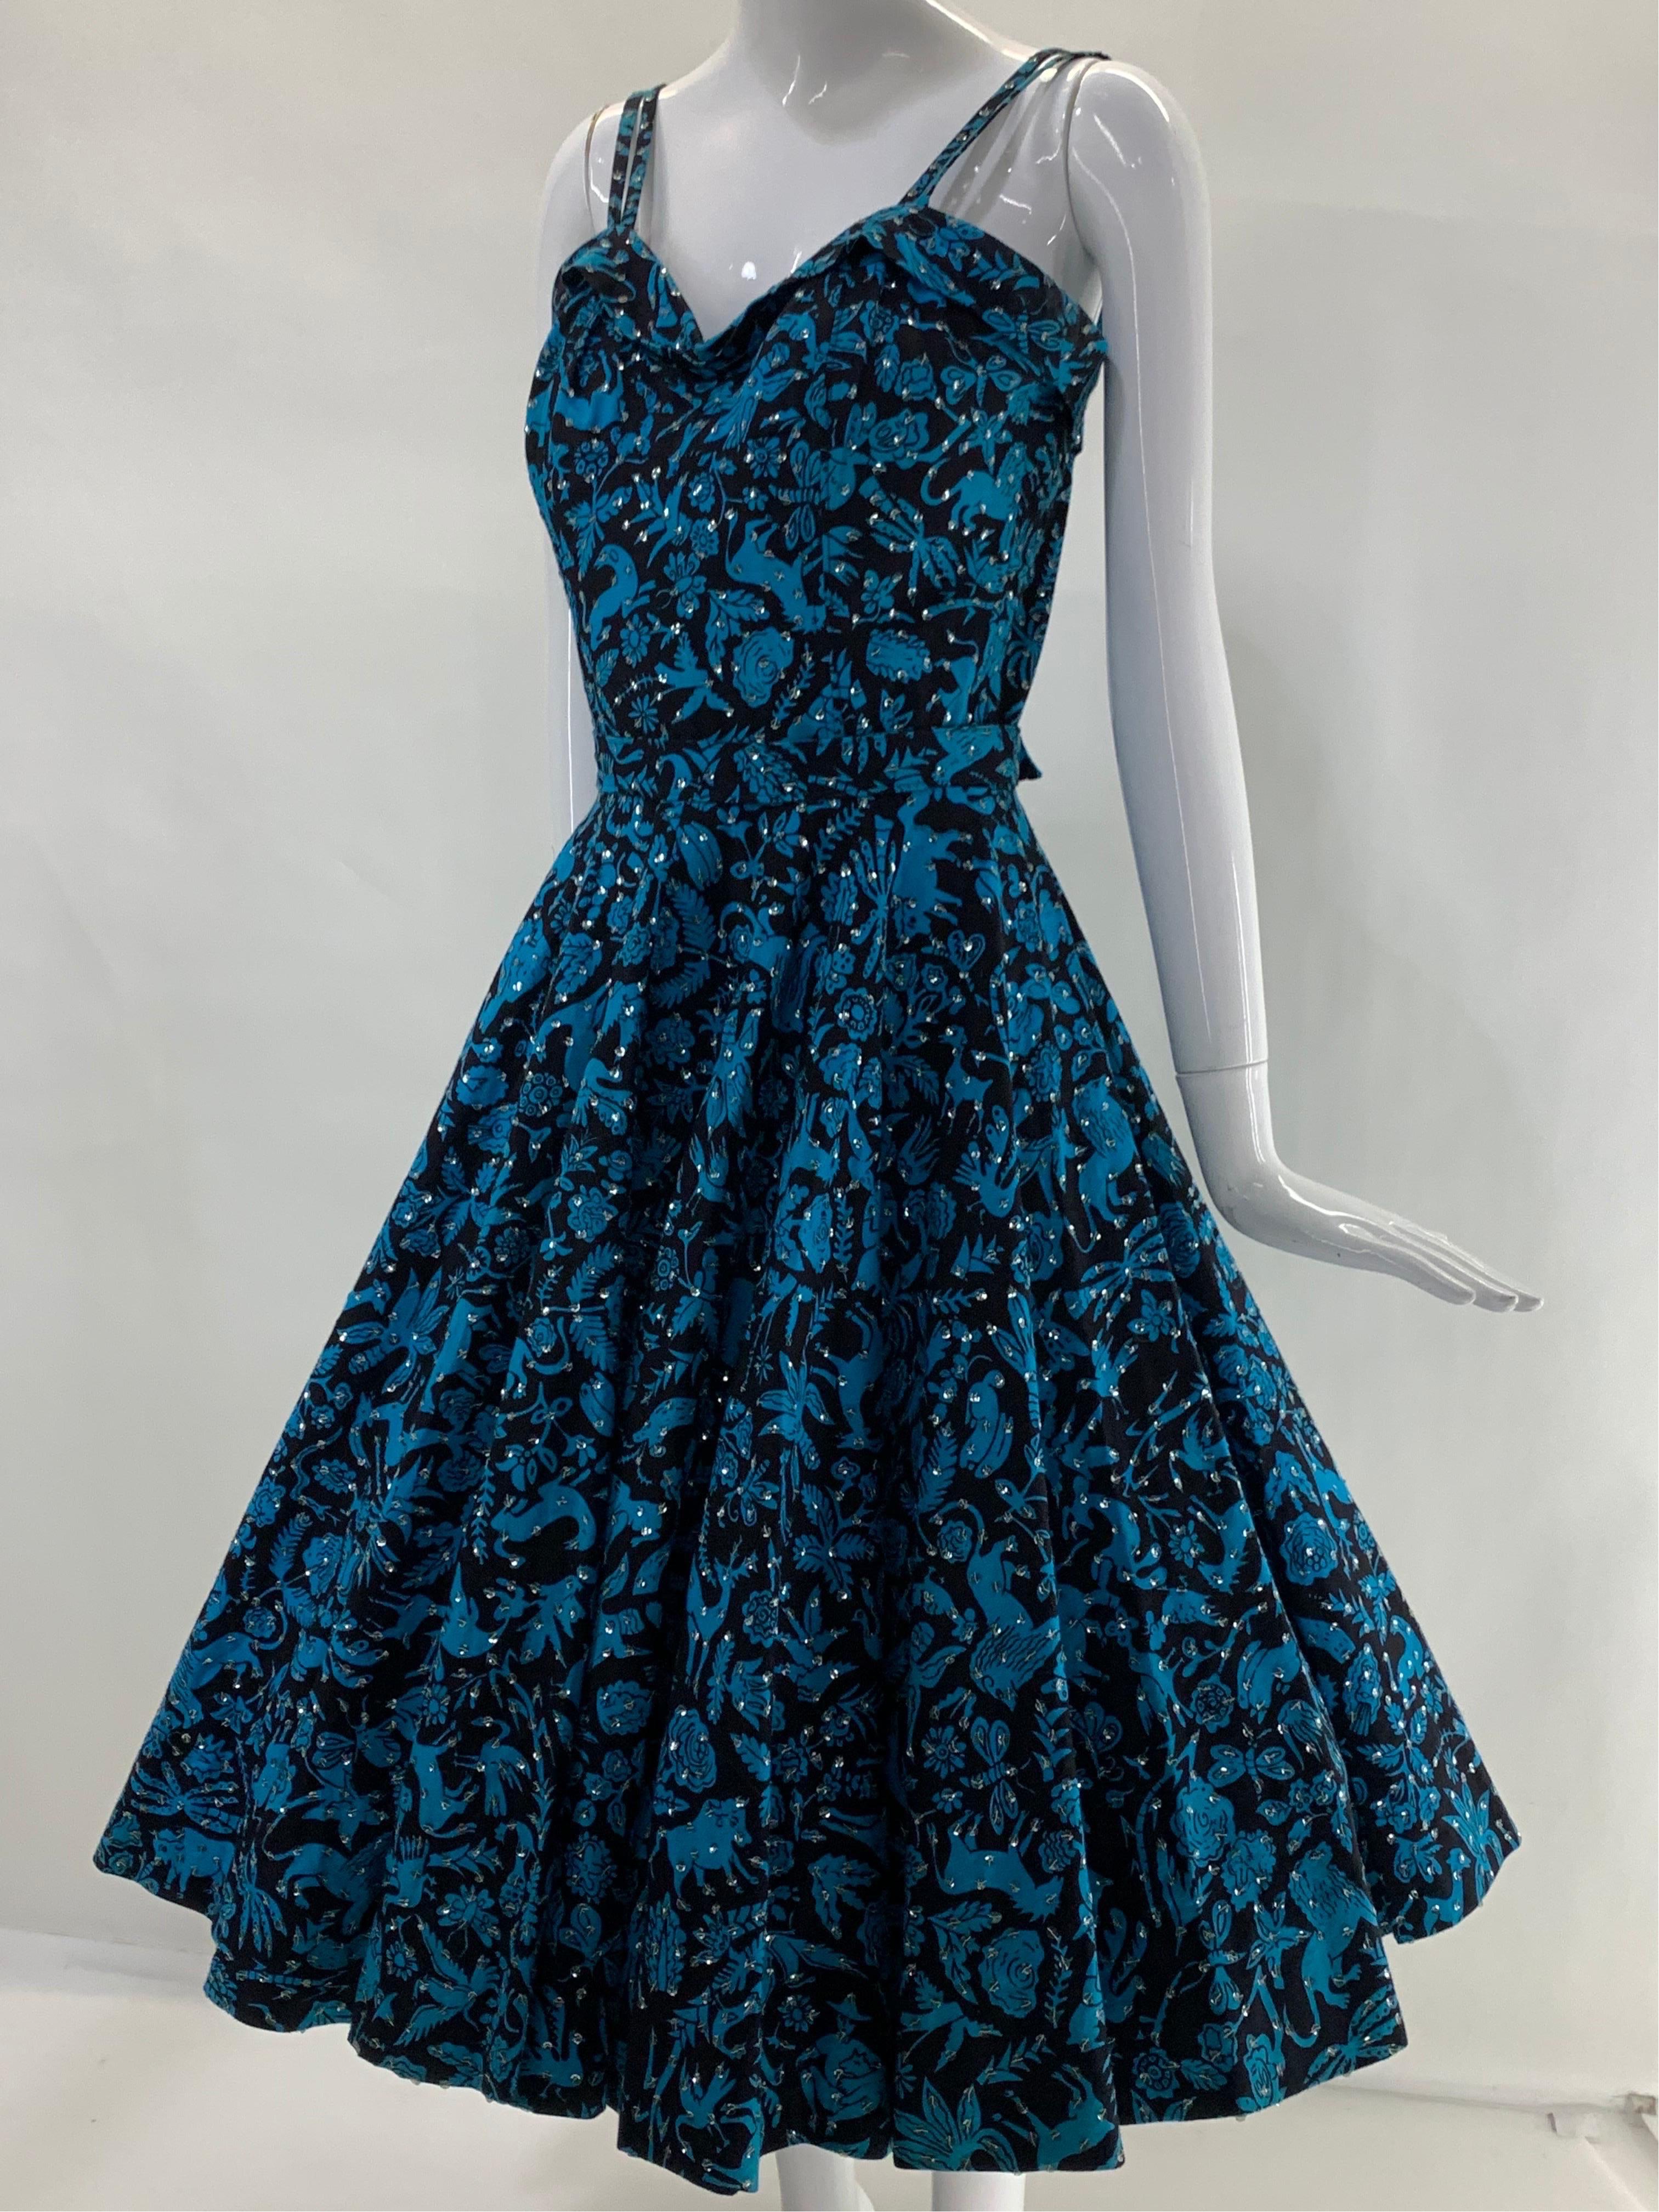 1950s Turquoise & Black Folkloric Print Cotton Summer Dress w/ Scattered Sequins For Sale 9